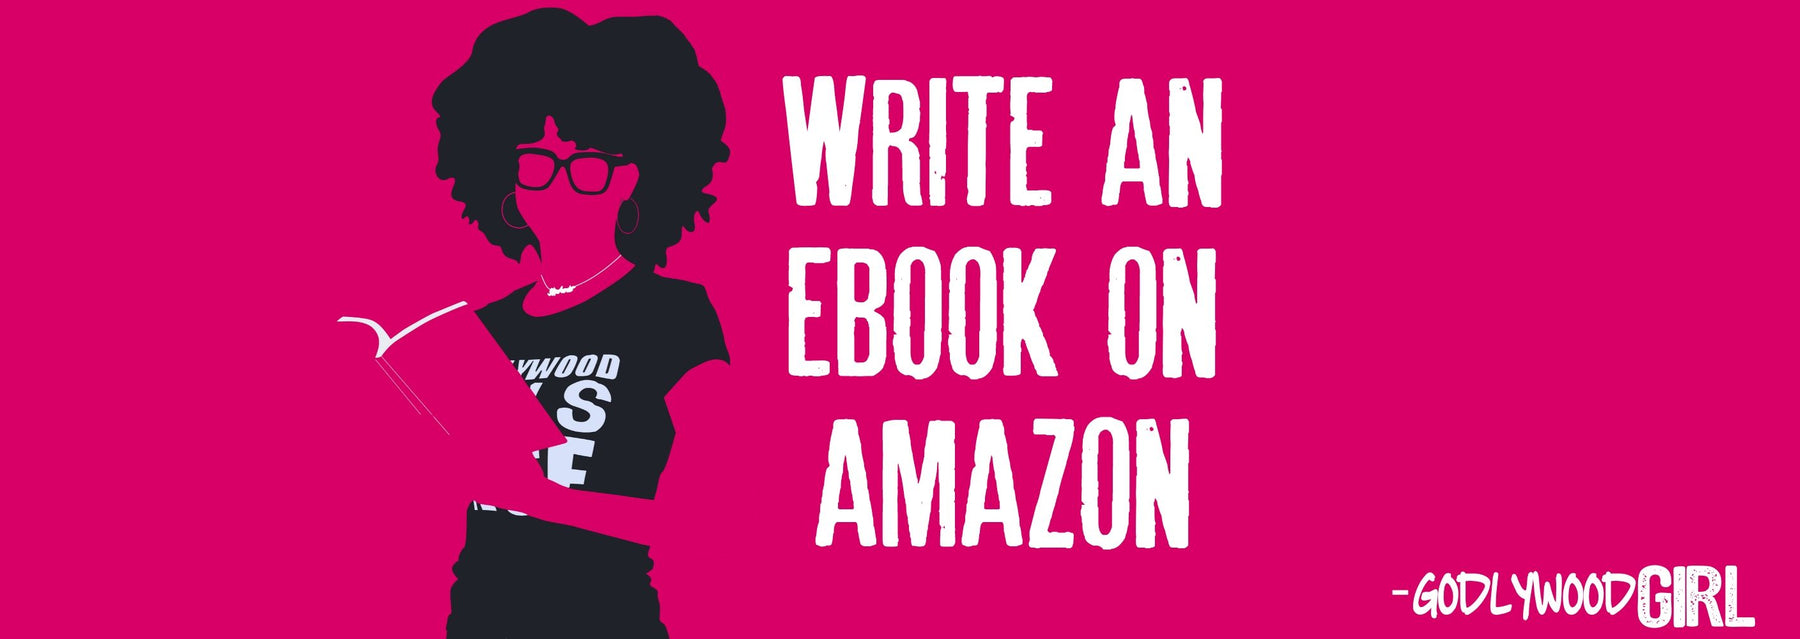 WRITE AN EBOOK AMAZON (How to Self-Publish Your First Book) || HOW TO